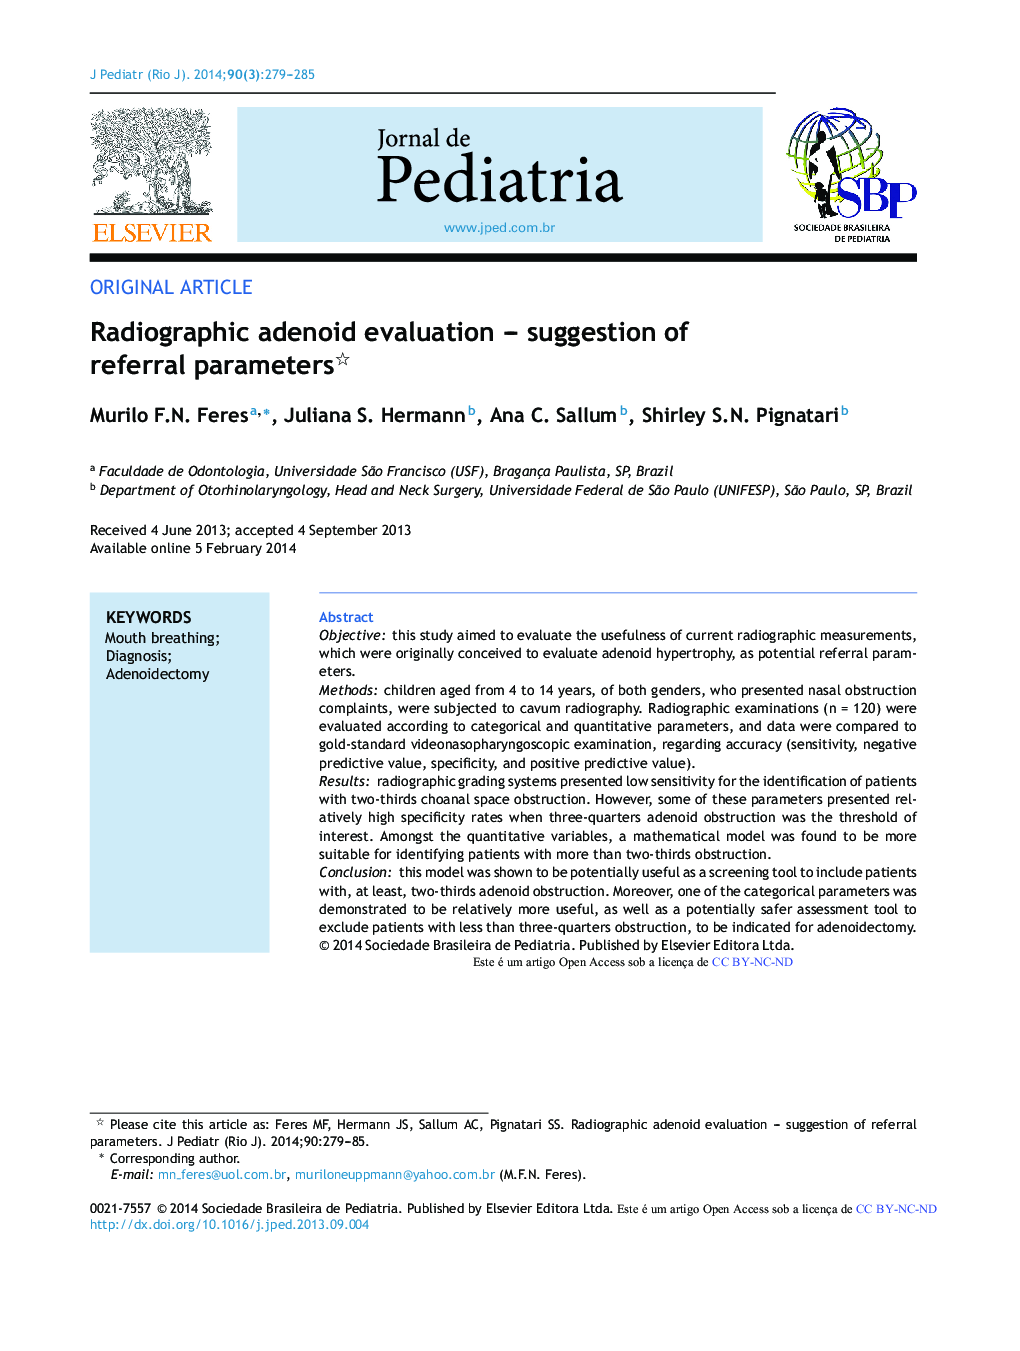 Radiographic adenoid evaluation – suggestion of referral parameters 